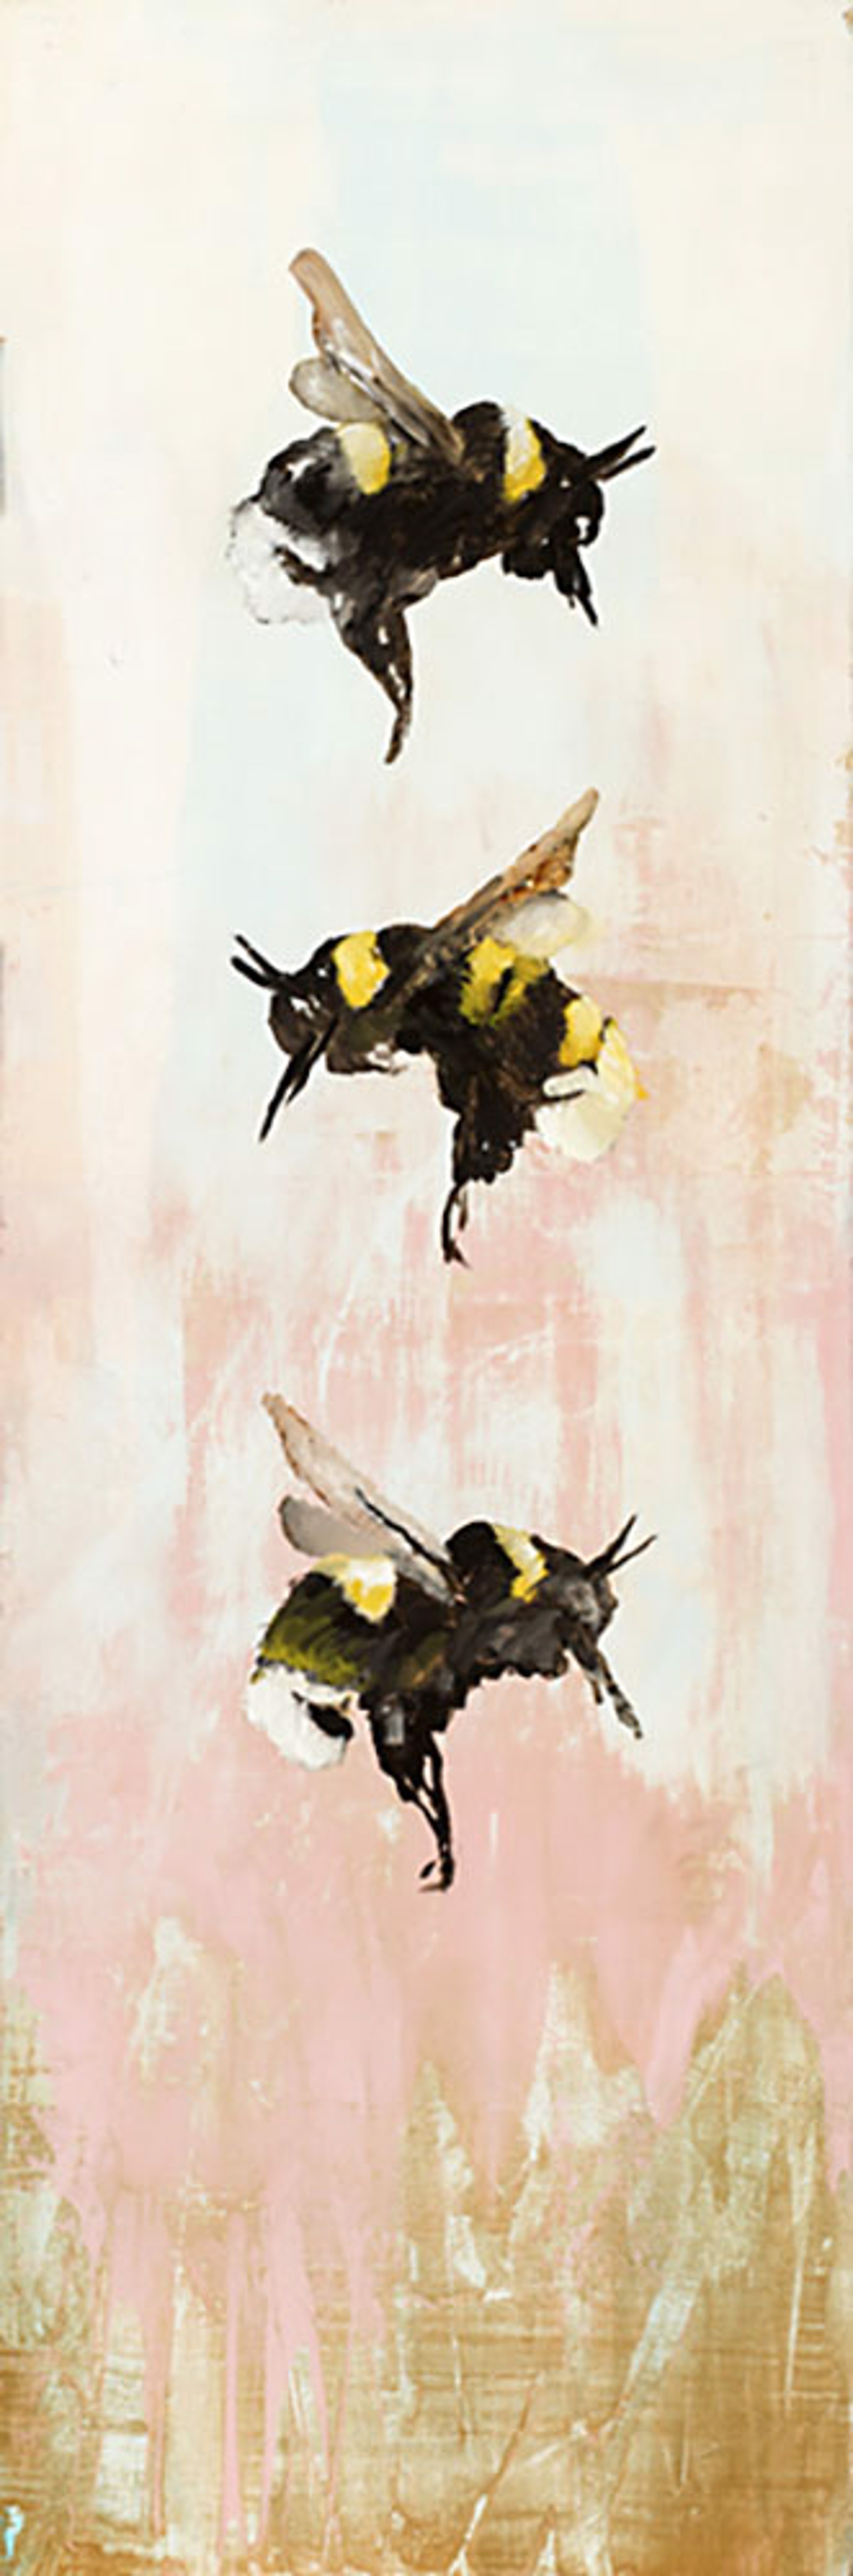 Oil Painting On Panel Of Bumble Bees With Contemporary Light Colored Abstract Background By Jenna Von Benedikt, Fine Art Available At Gallery Wild